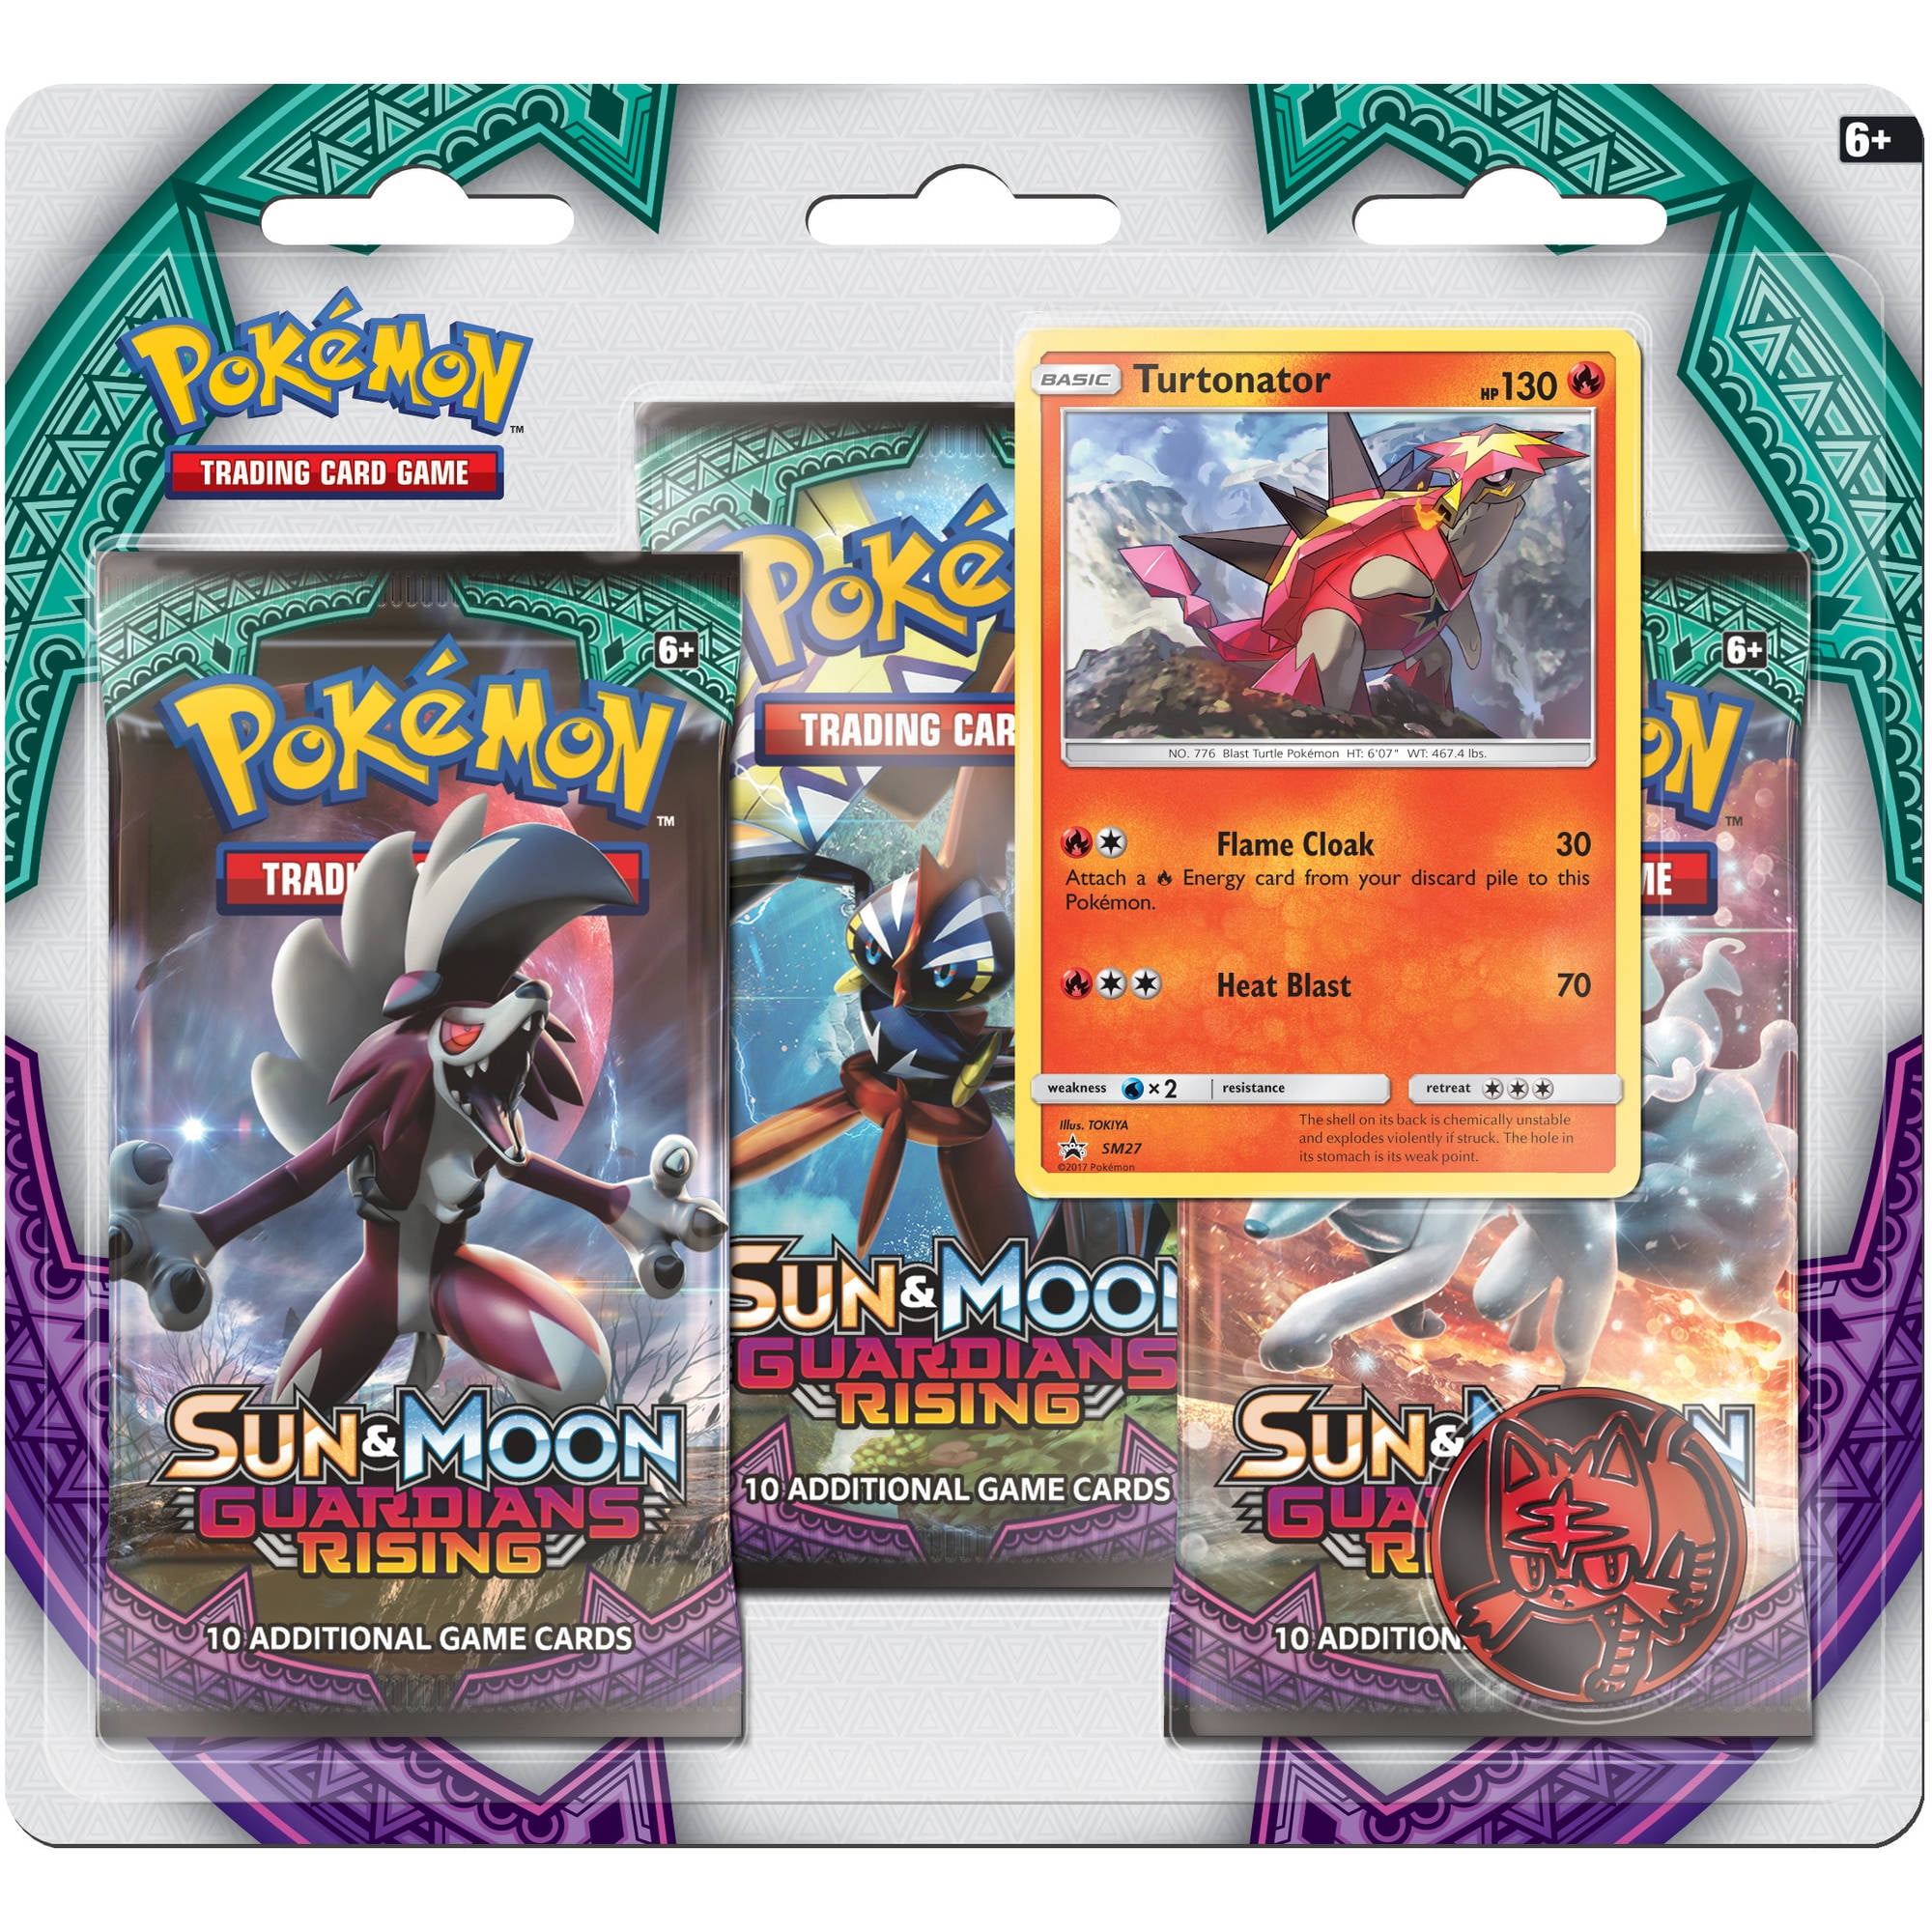 50 Pokemon TCG Sun and Moon Guardians Rising Family Dollar 3 Card Booster Pack for sale online 